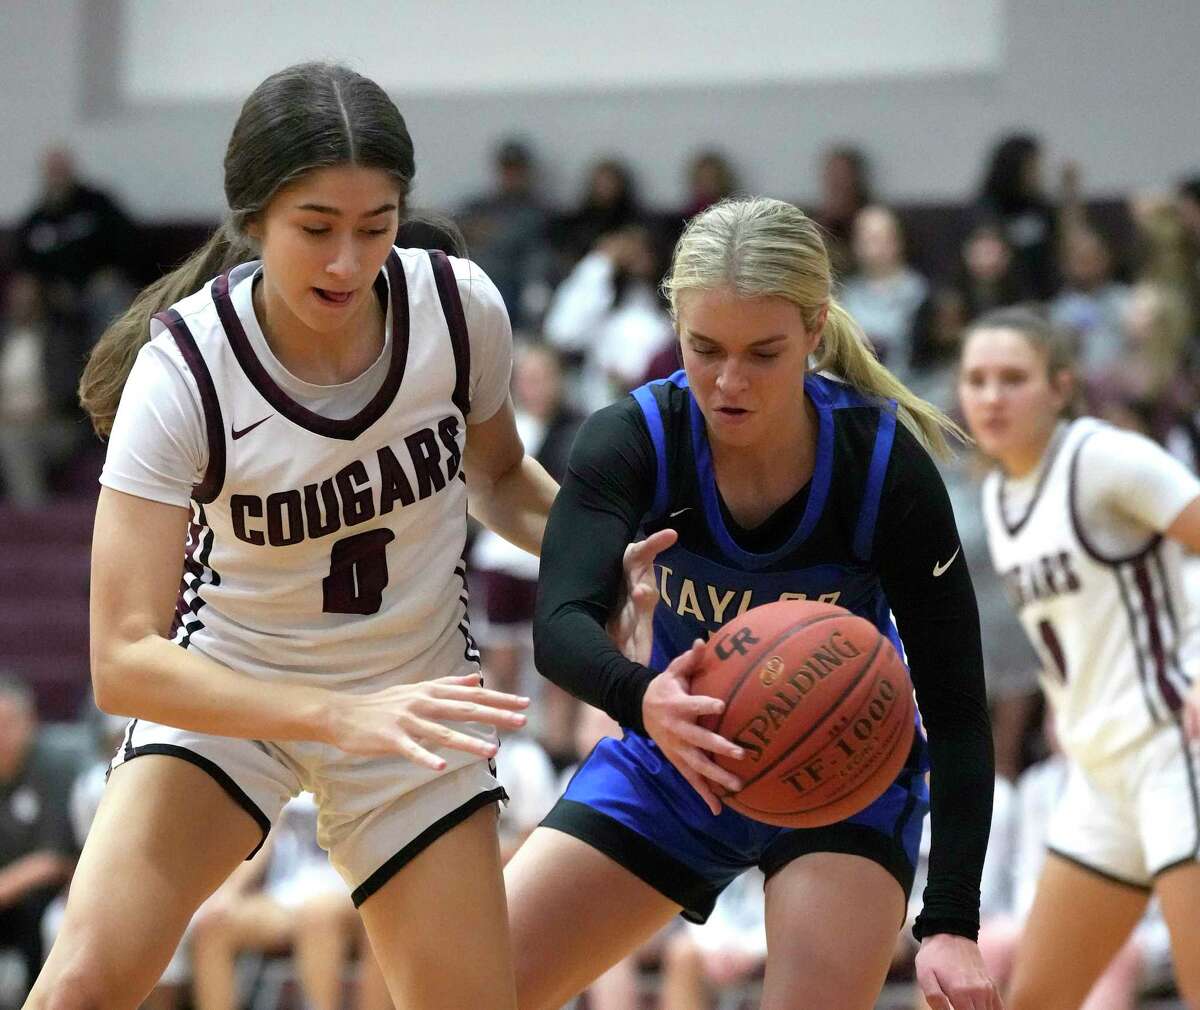 Cinco Ranch's Sofia Budnik (0) chases a loose ball with Katy Taylor's Olivia Upshaw (2) during the first half of a District 19-6A girls high school basketball game at Cinco Ranch High School on Tuesday, Nov. 22, 2022 in Katy.